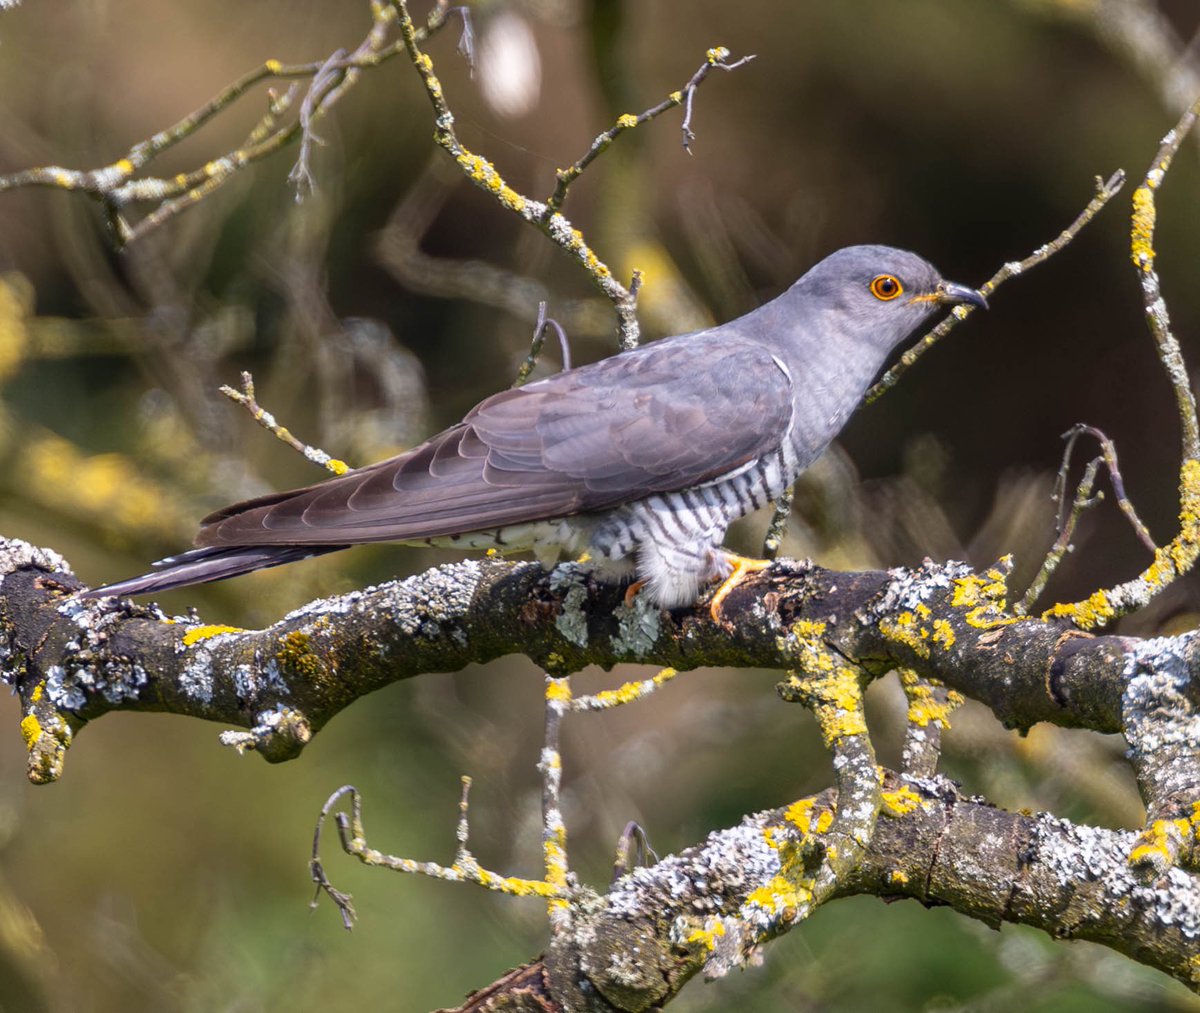 3 cuckoo's showing well today